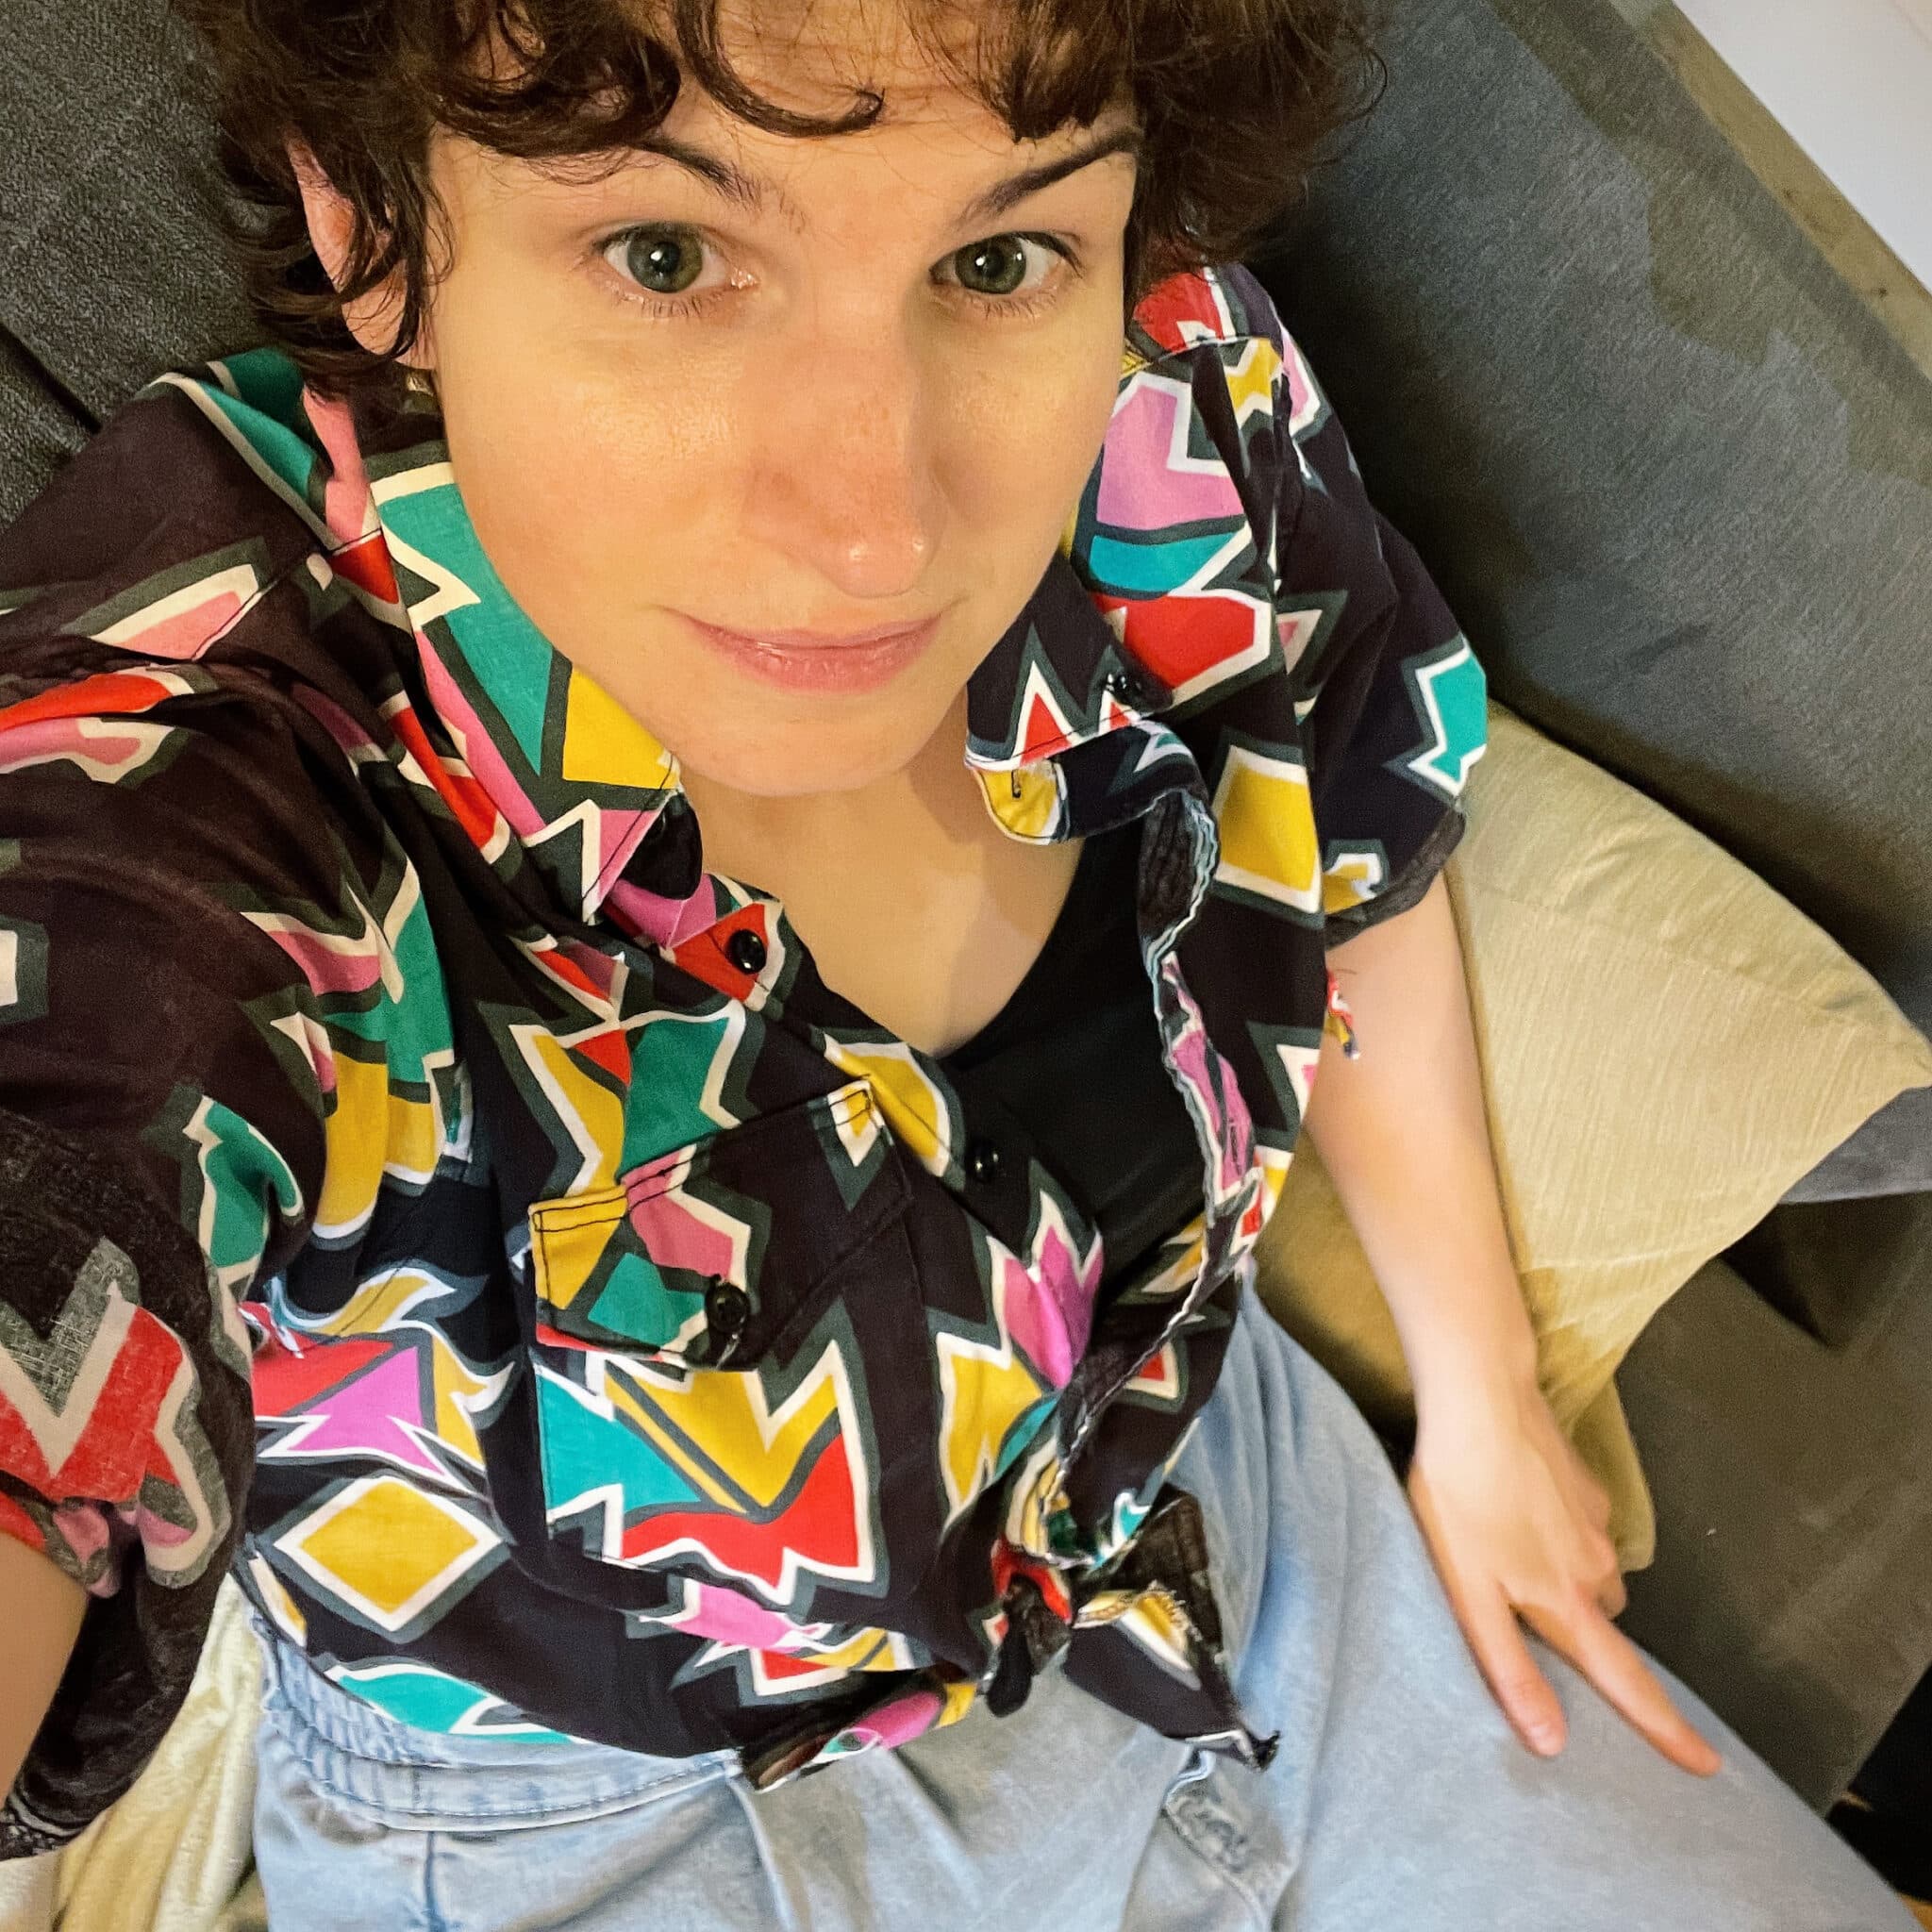 Alex, a white non-binary person in their 30s wearing a colourful shirt looks up at the camera with a bit of curly hair on their forehead.